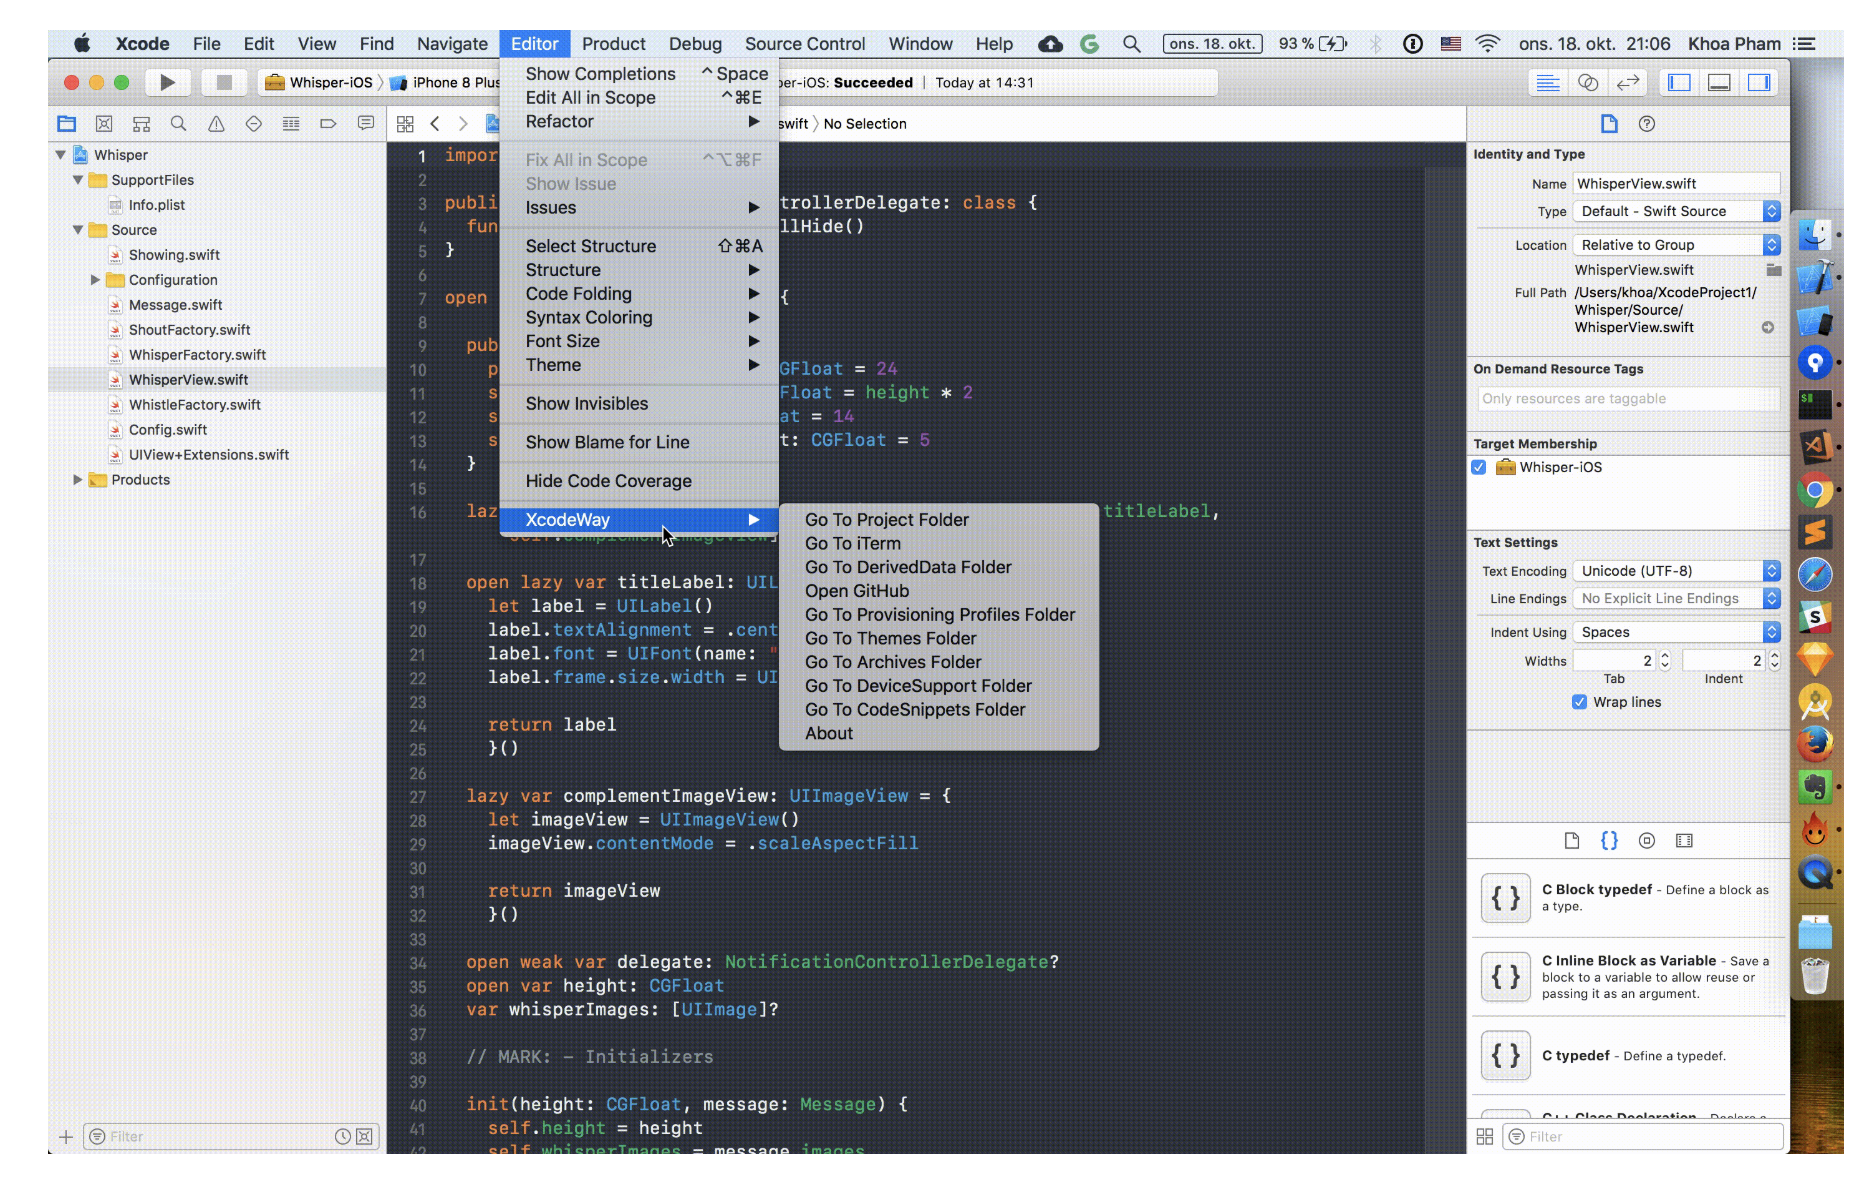 XcodeWay works by creating a menu under Editor with lots of options to navigate to other places right from Xcode. It looks simple but there was some hard work required.